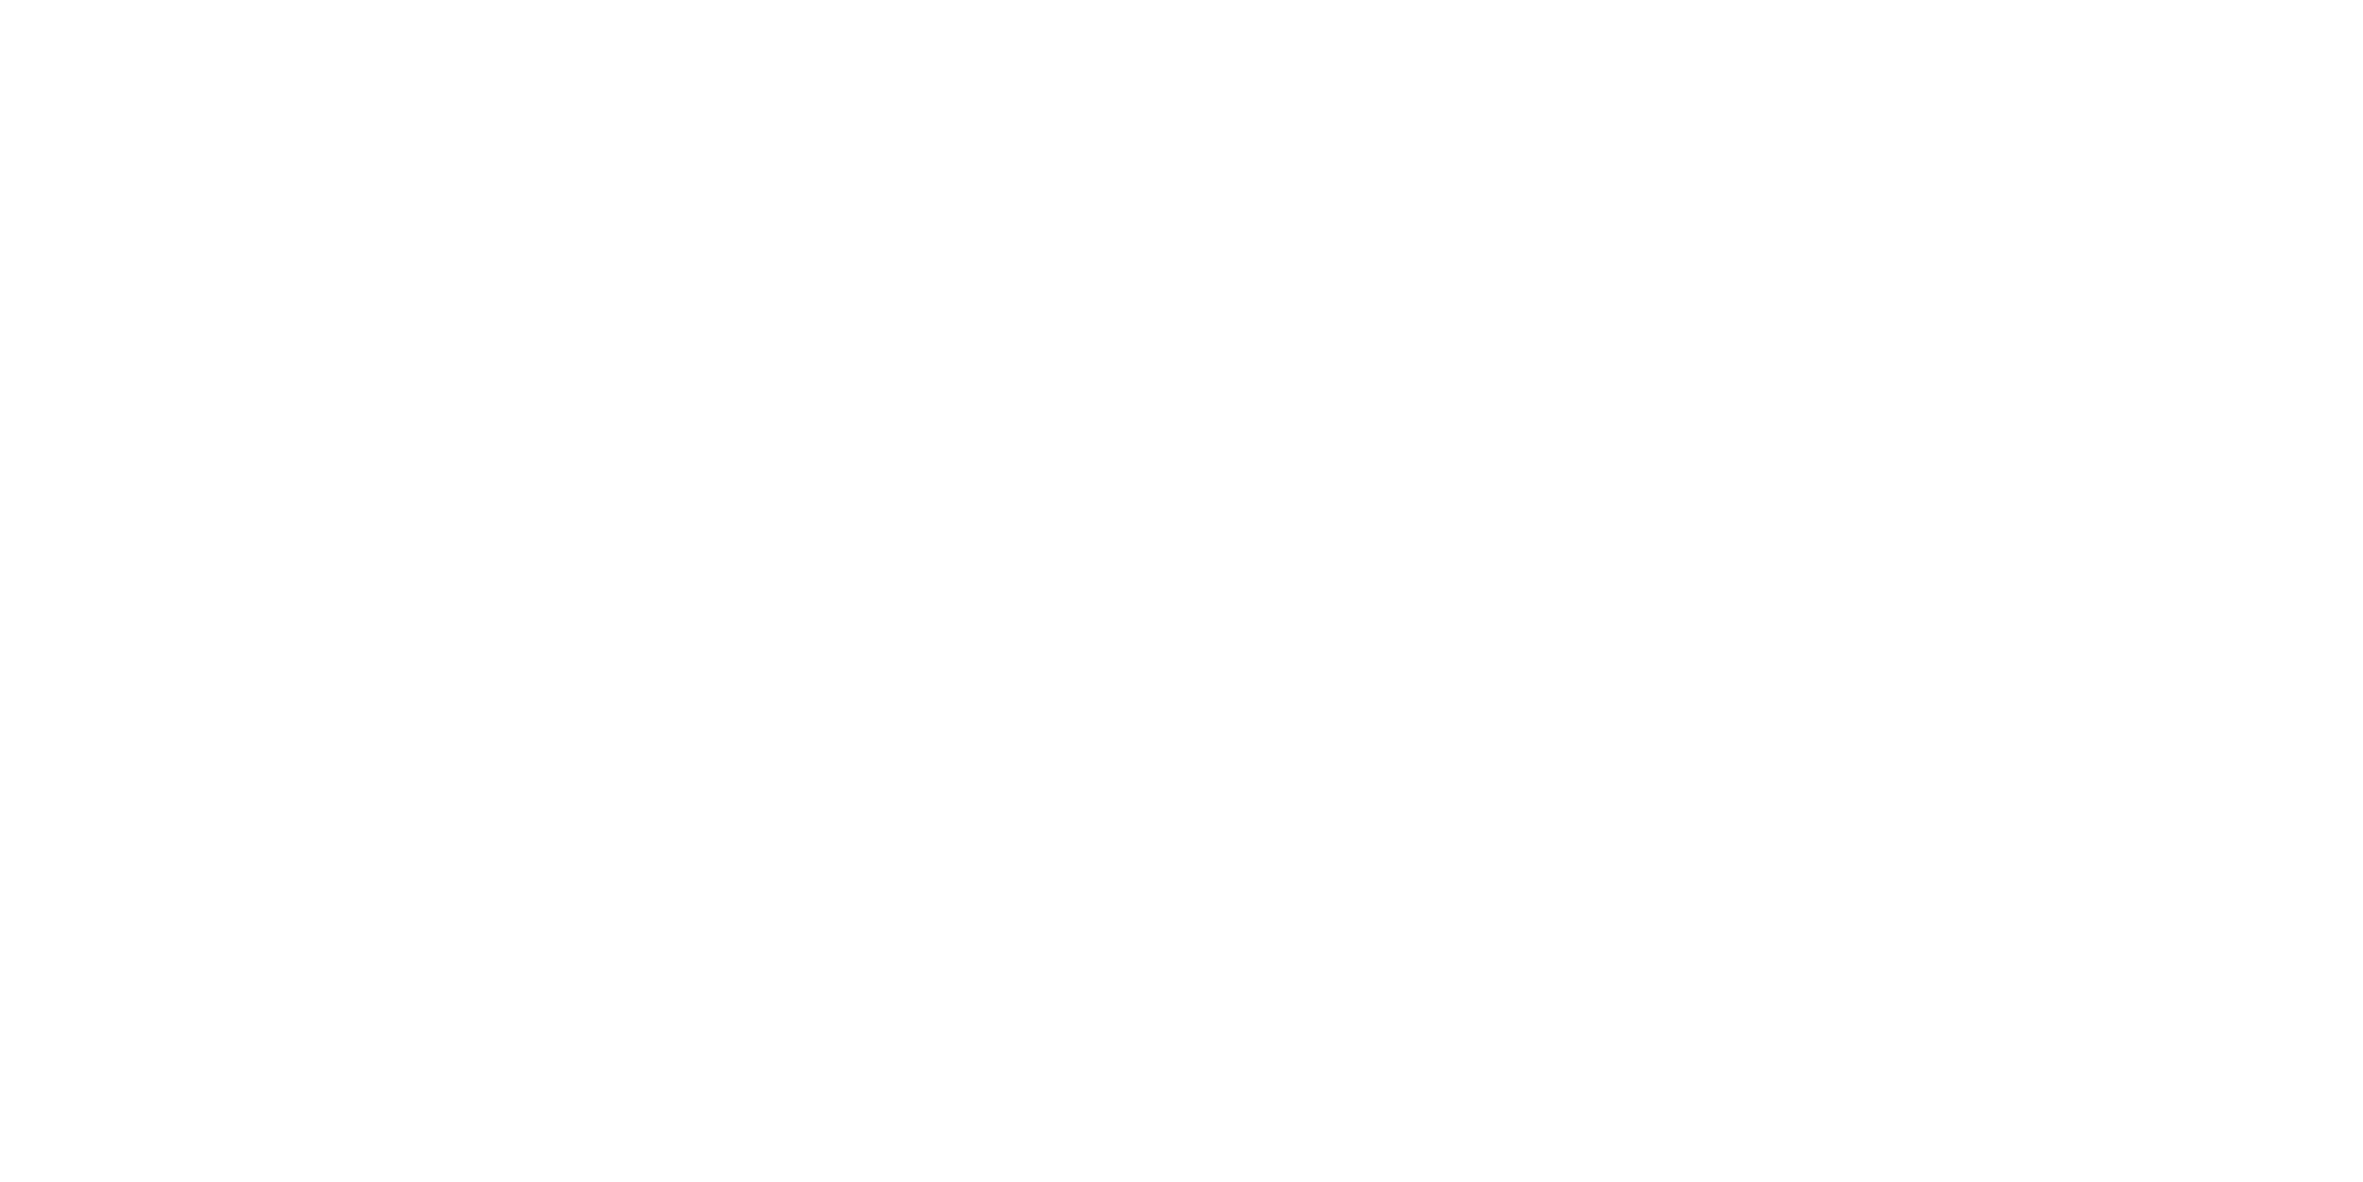 The logo of the cleaning tool brand aspiron